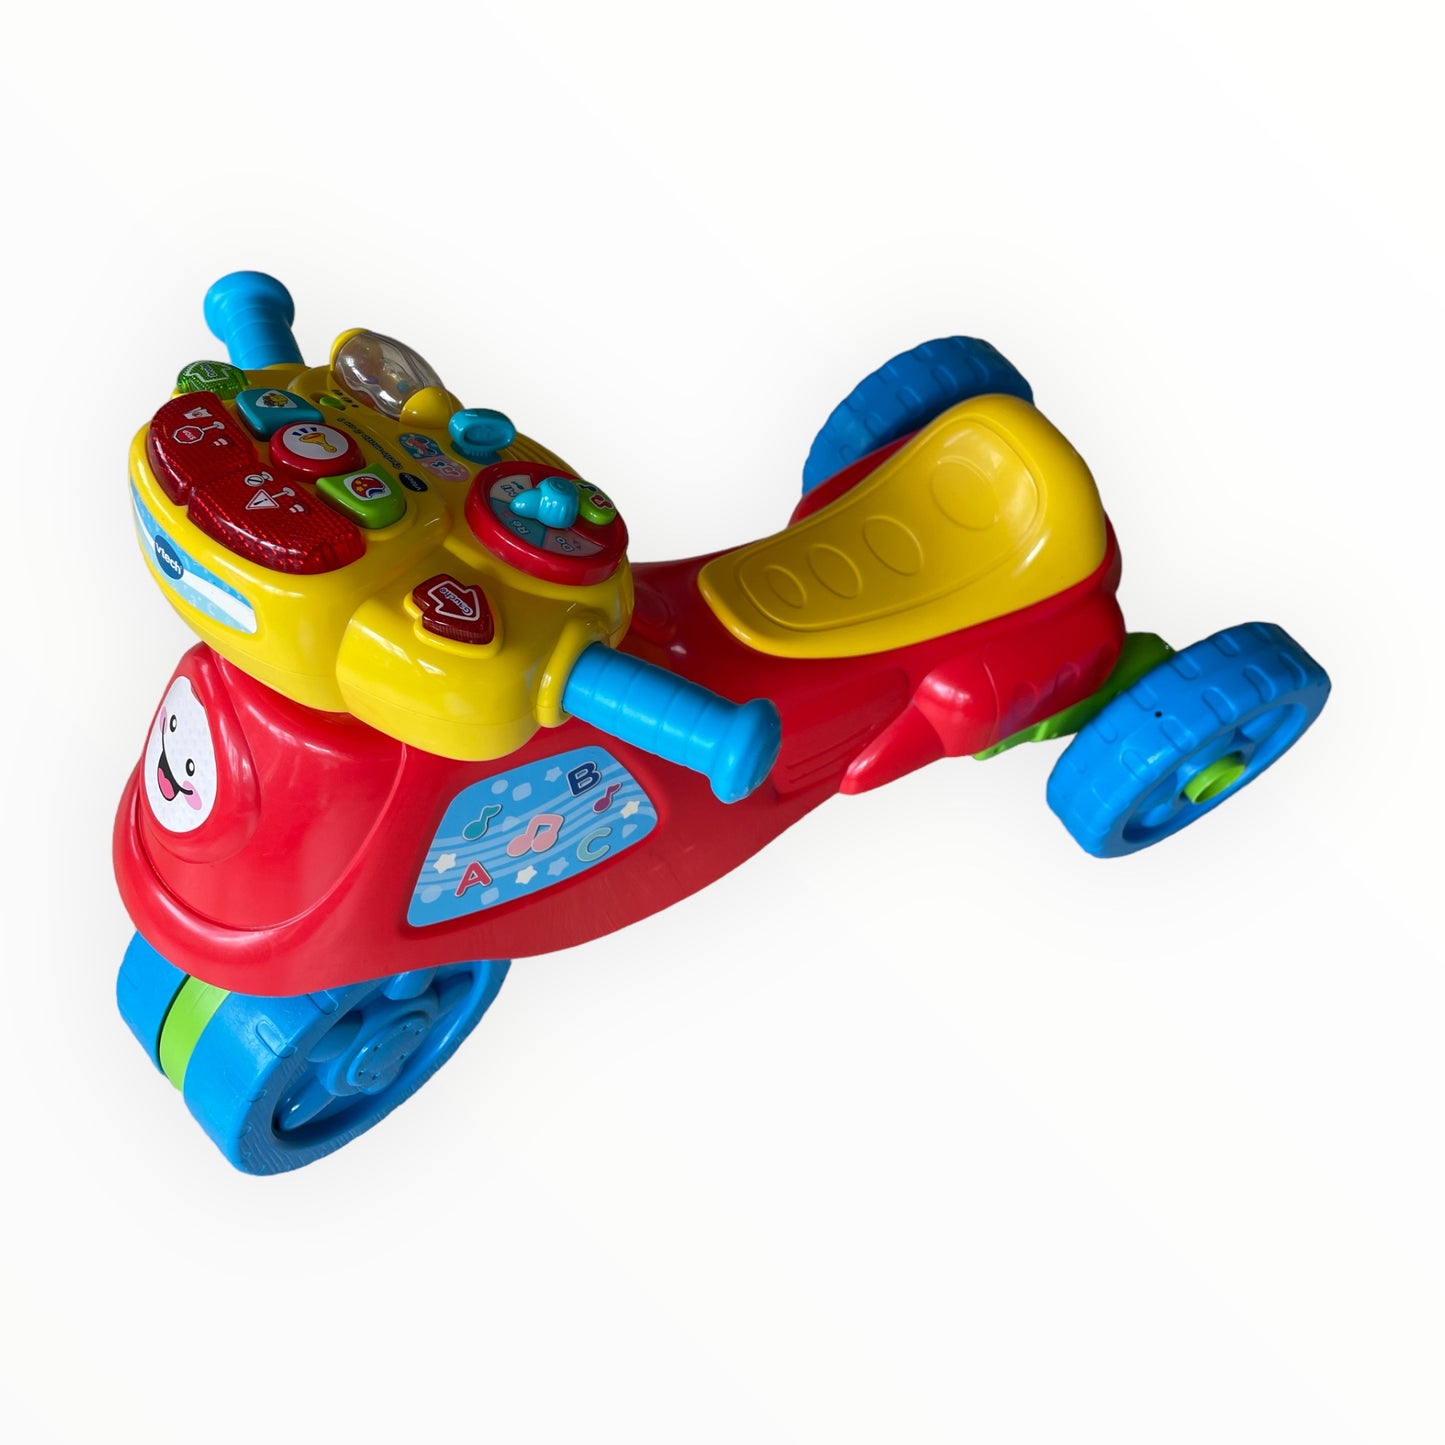 VTech Baby - 2-in-1 Motorcycle